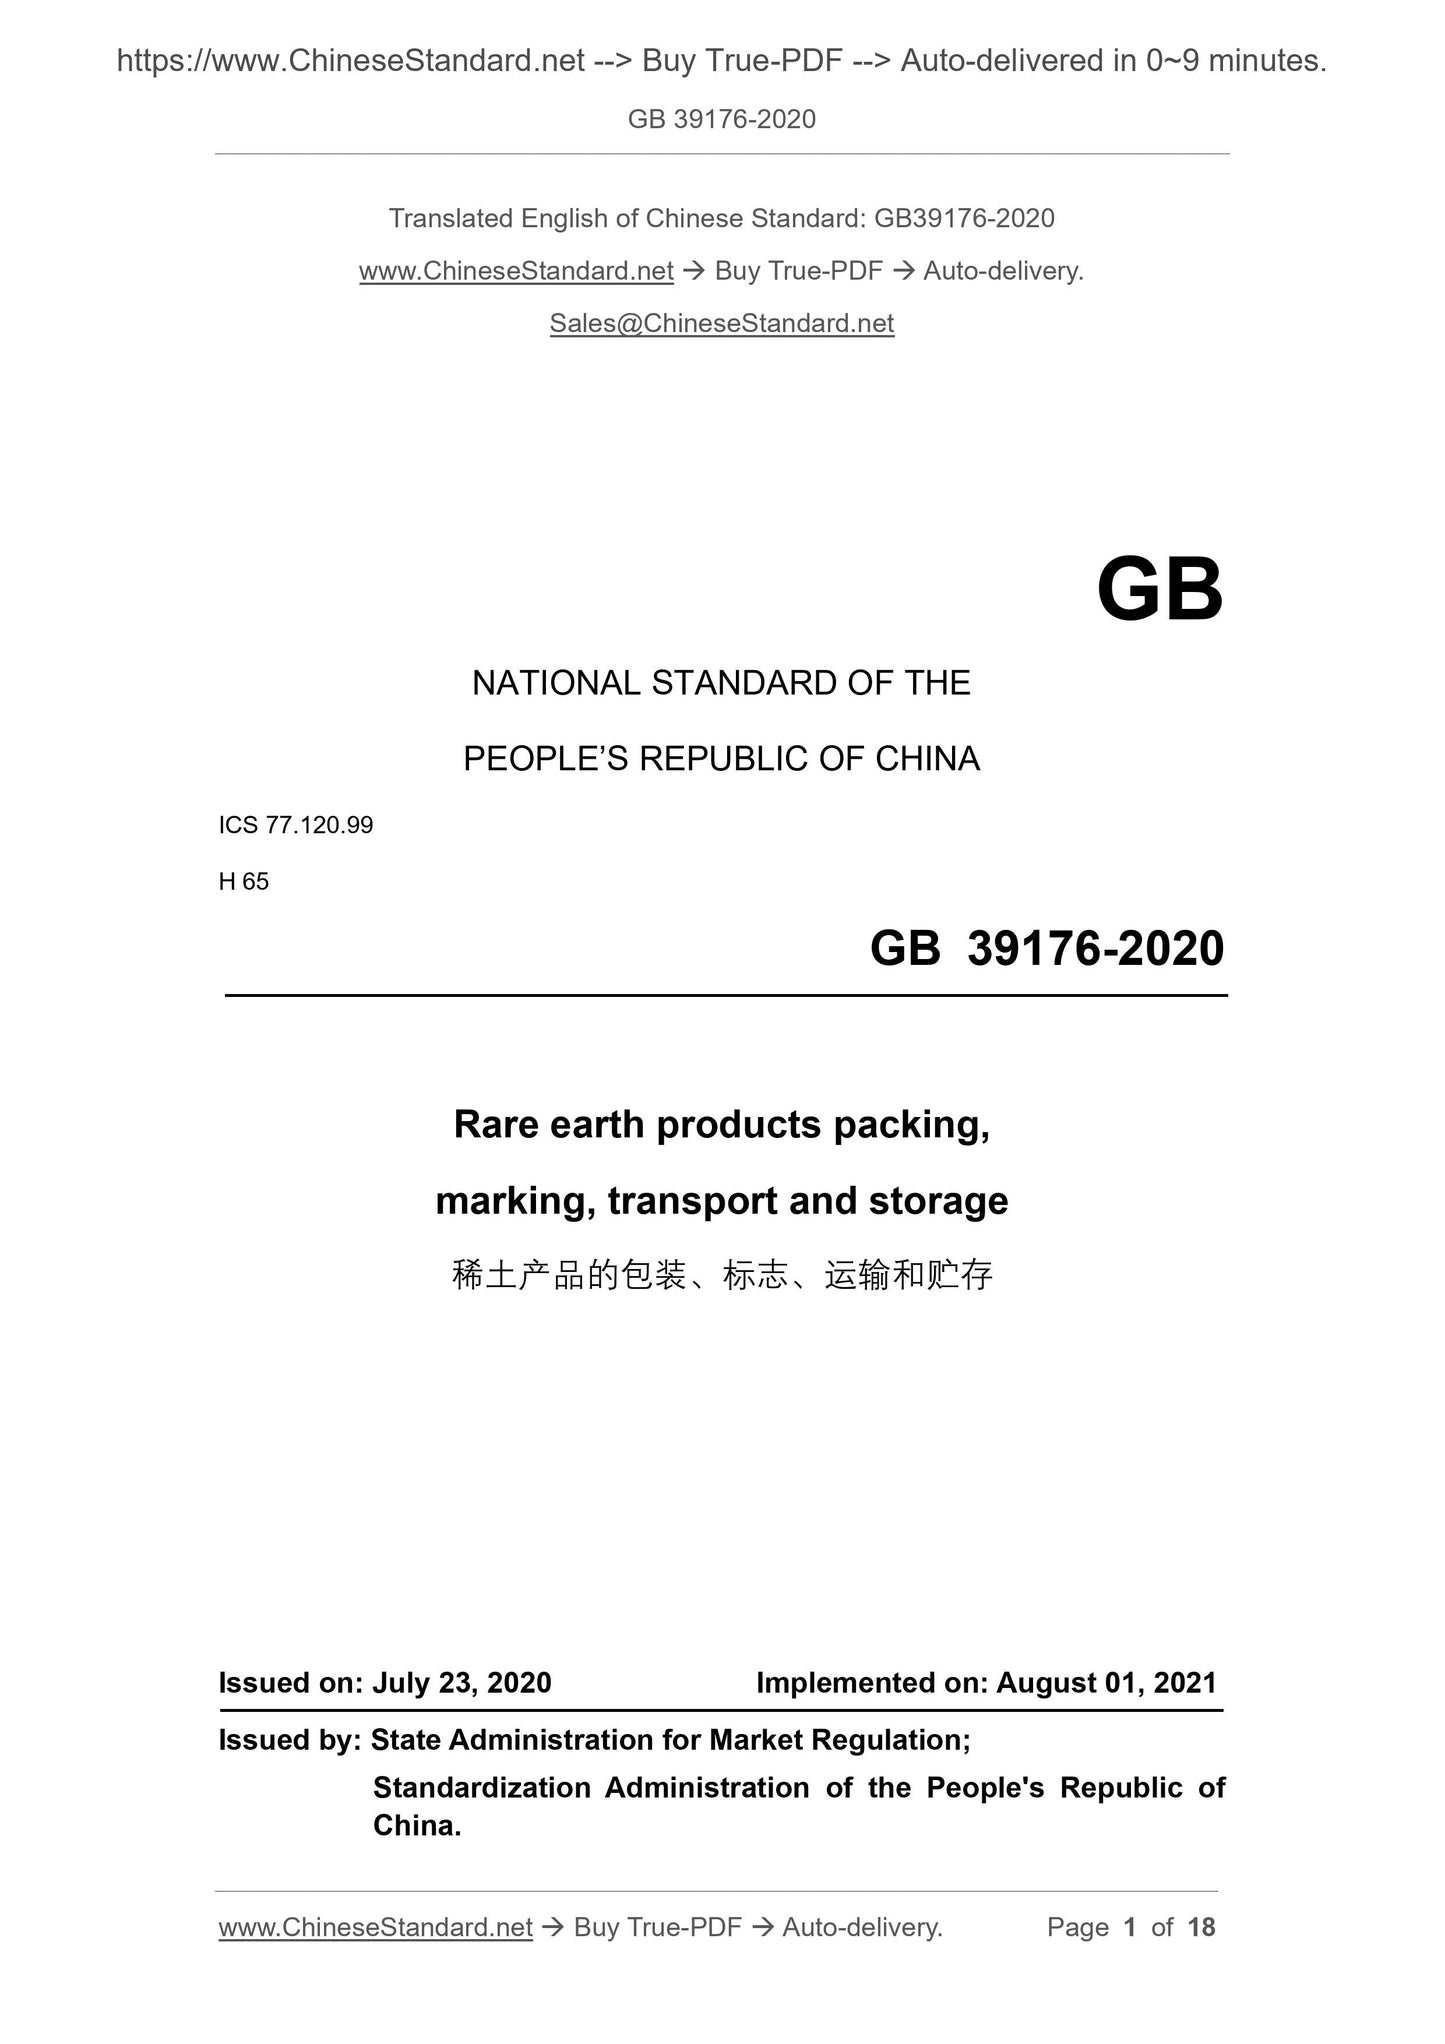 GB 39176-2020 Page 1